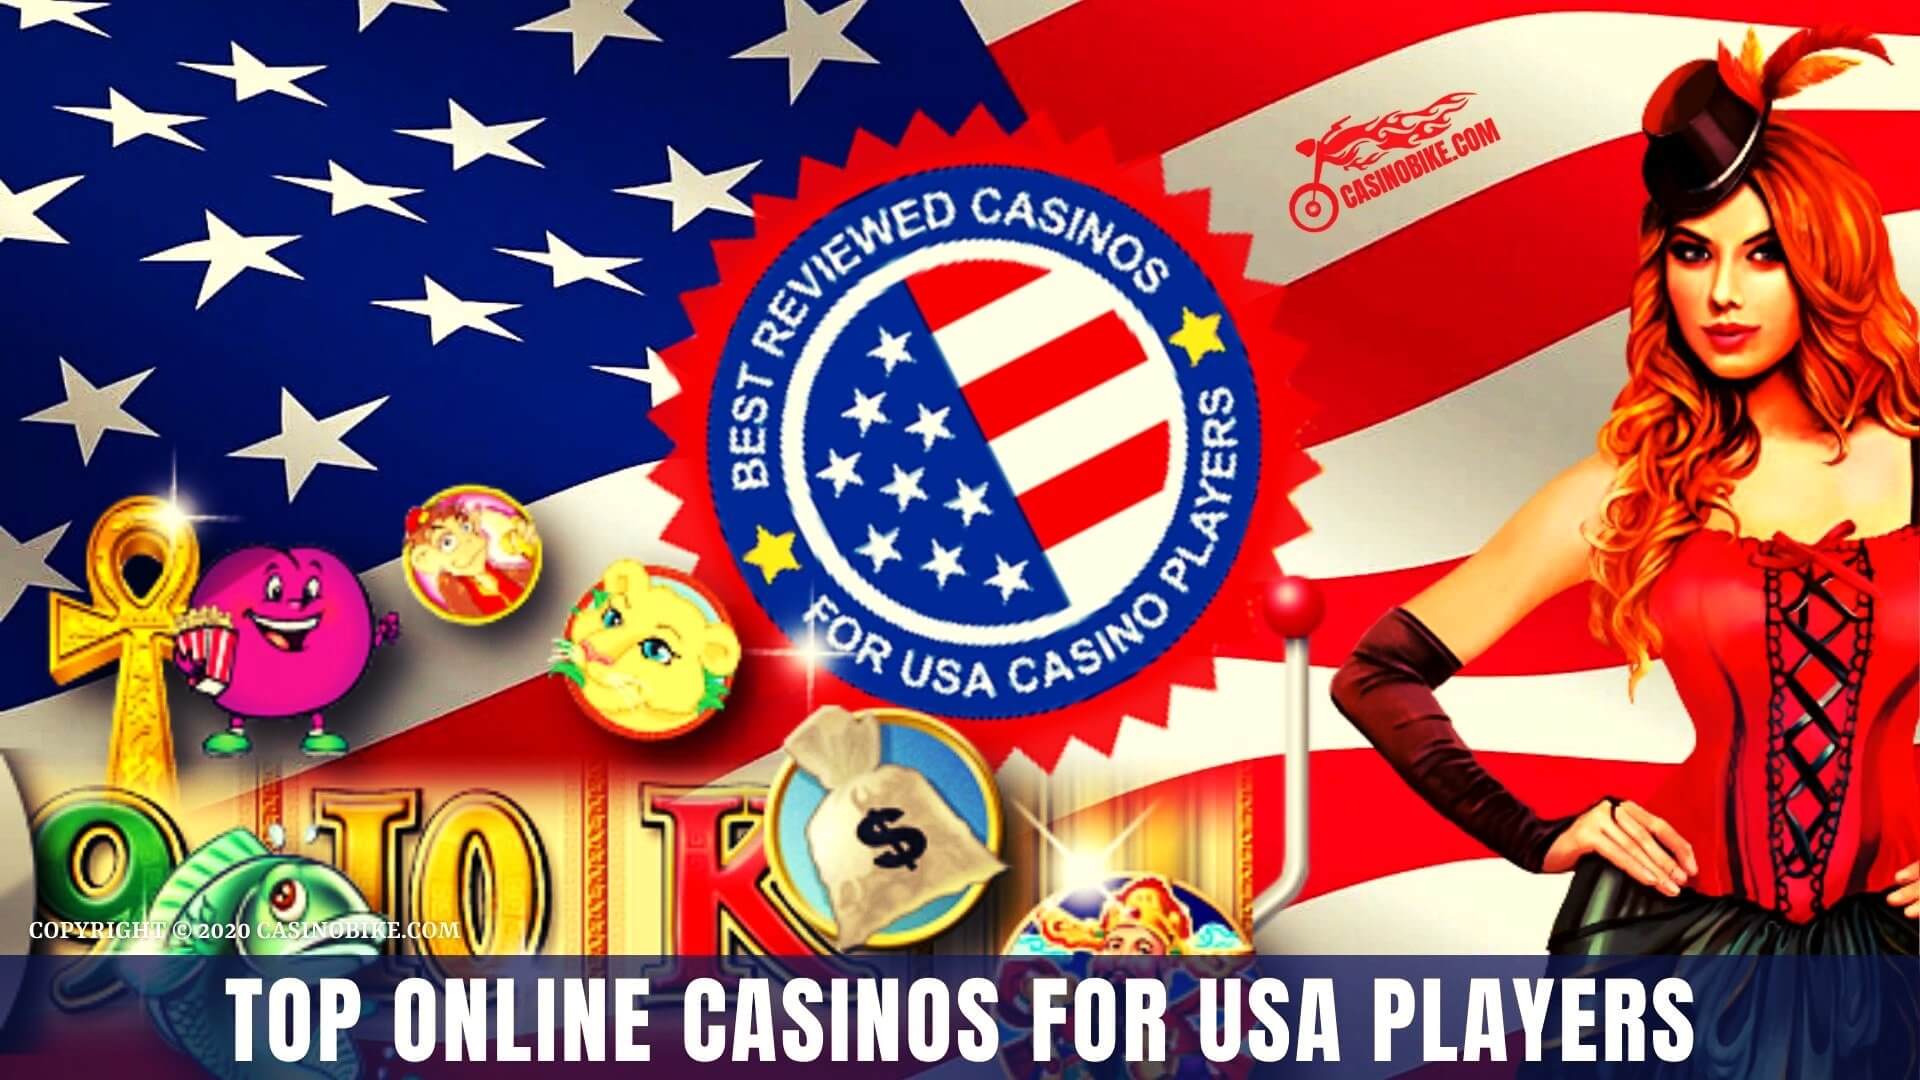 Top Online Casinos for USA Players